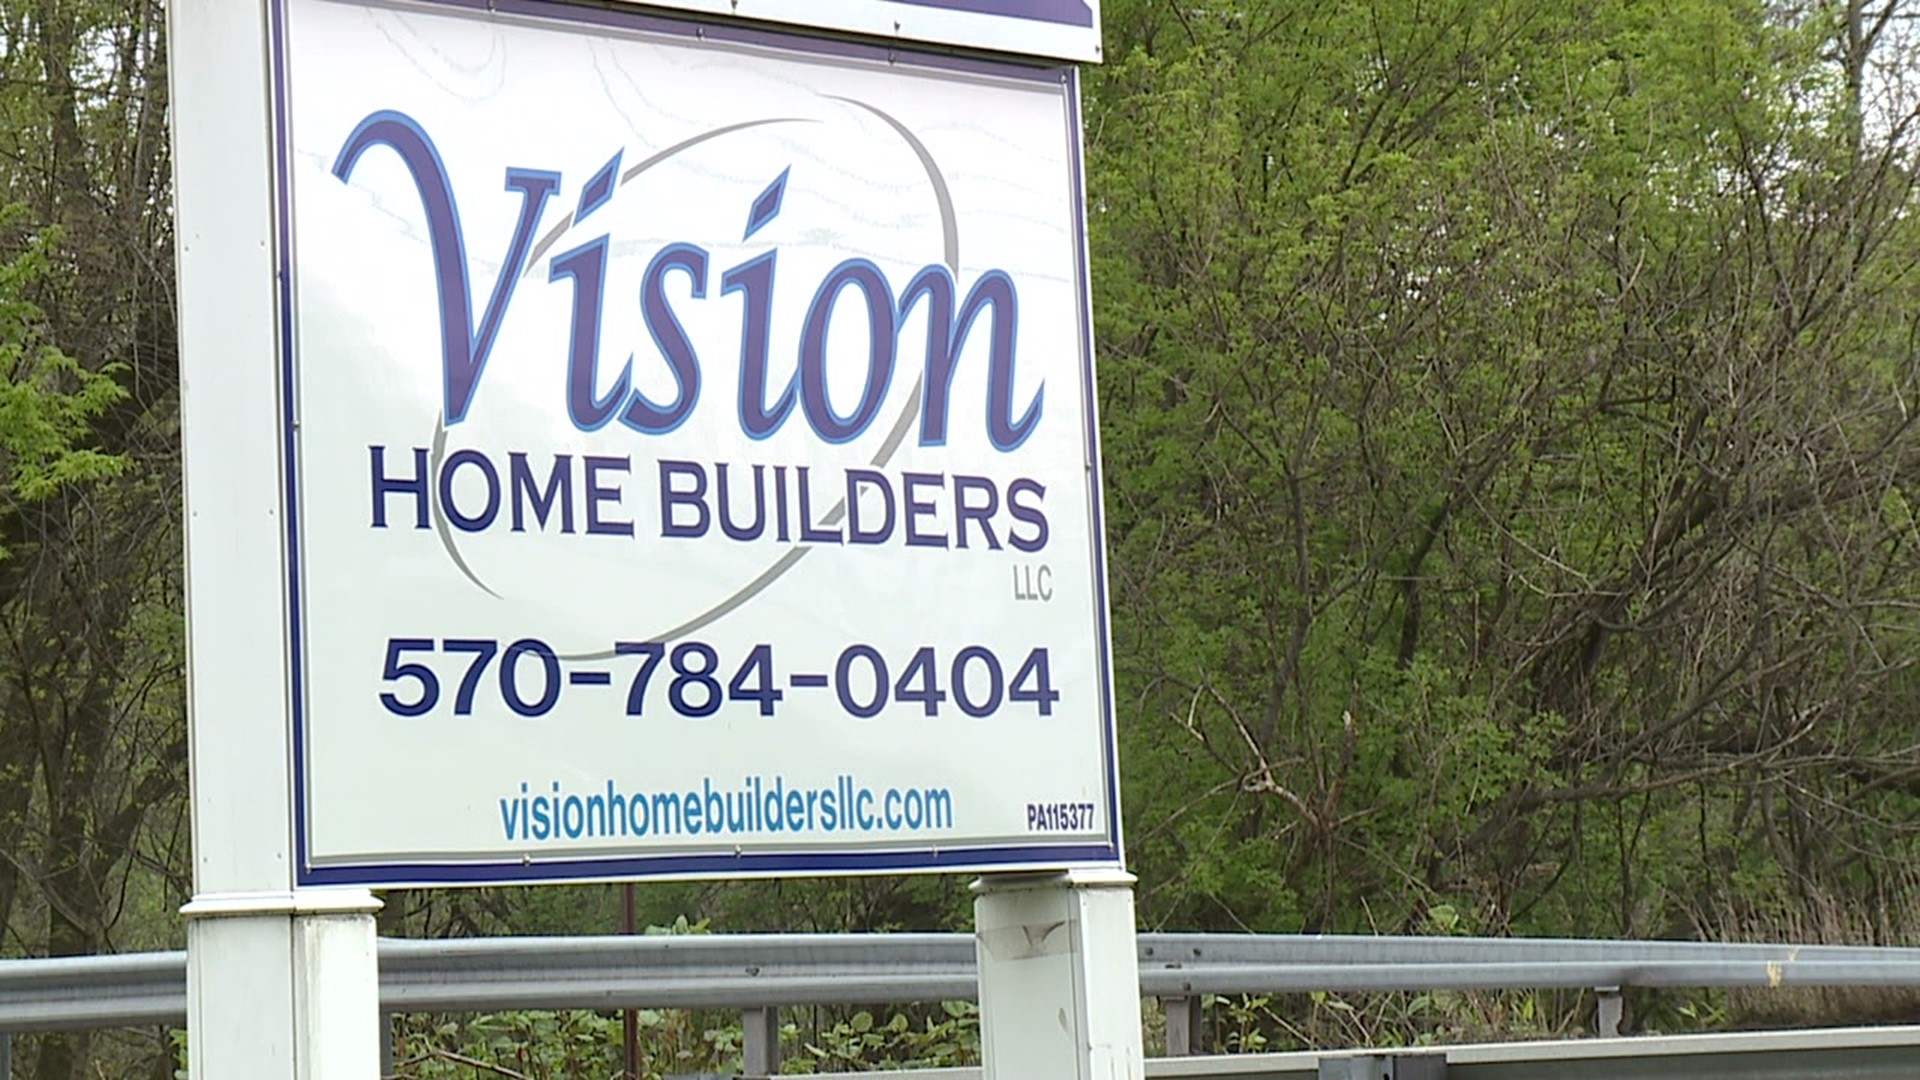 Action 16 Investigates has the latest on the fallout from the contractor's abrupt closure.